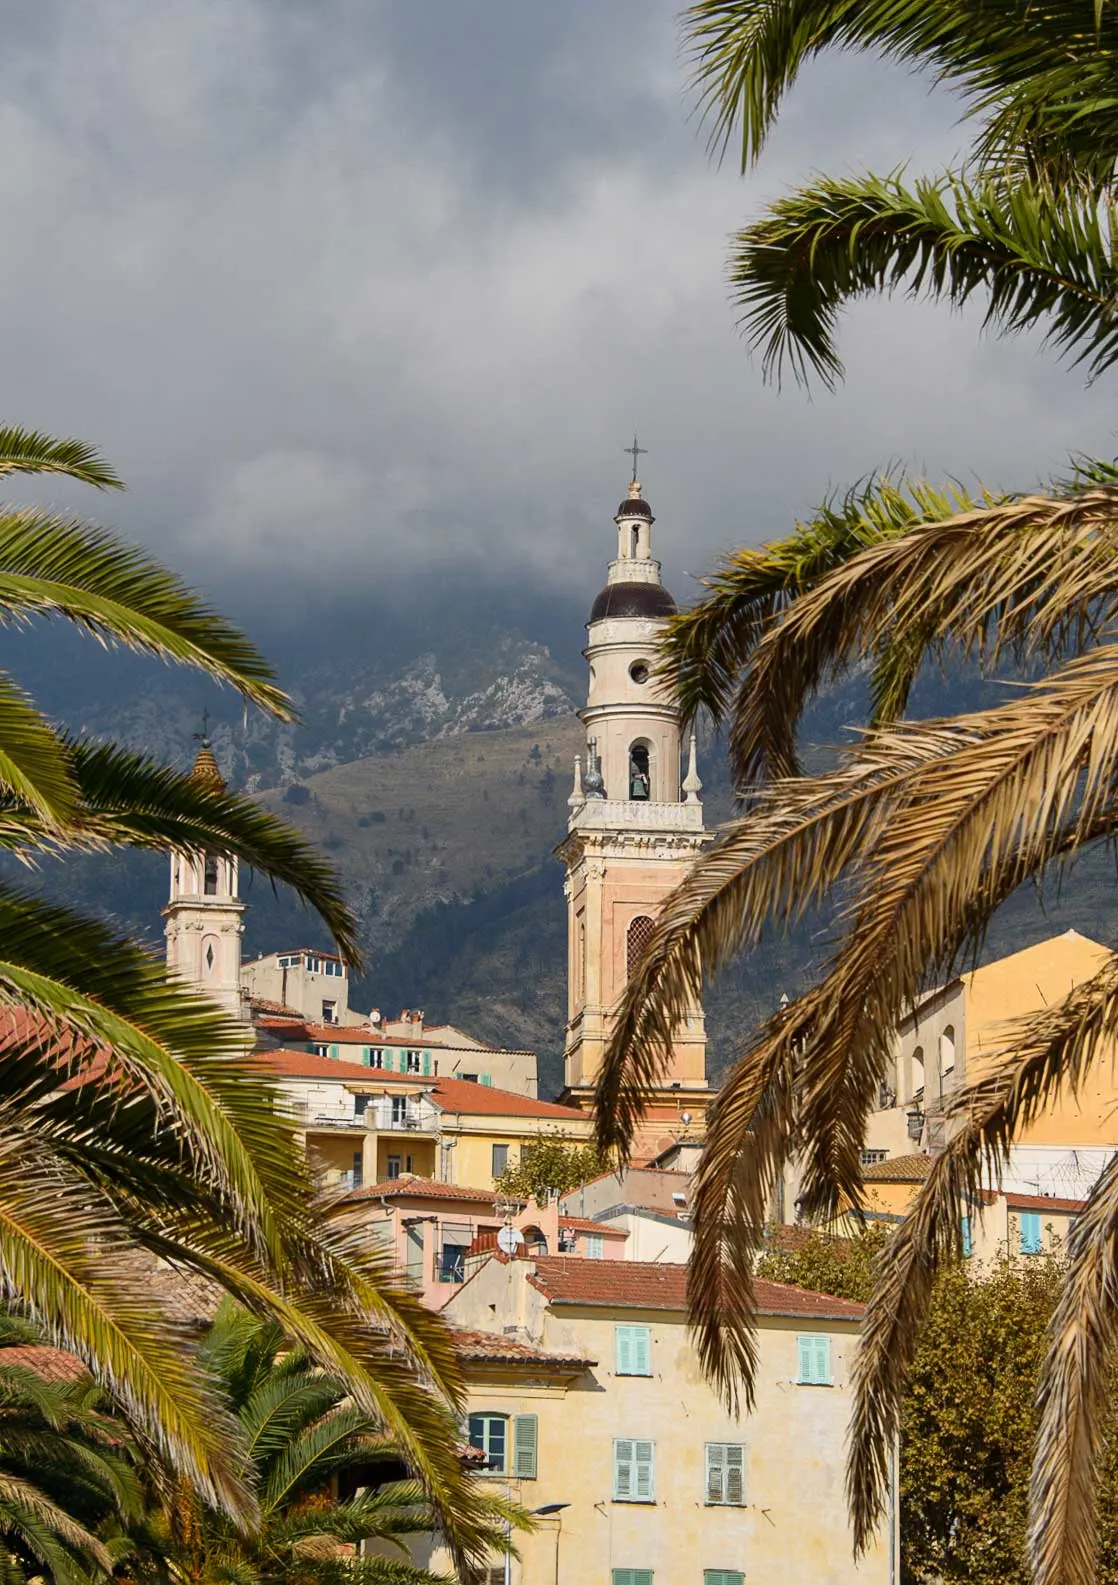 Pink hued village with baroque church spires in front of misty mountains with palm trees in the foreground. 